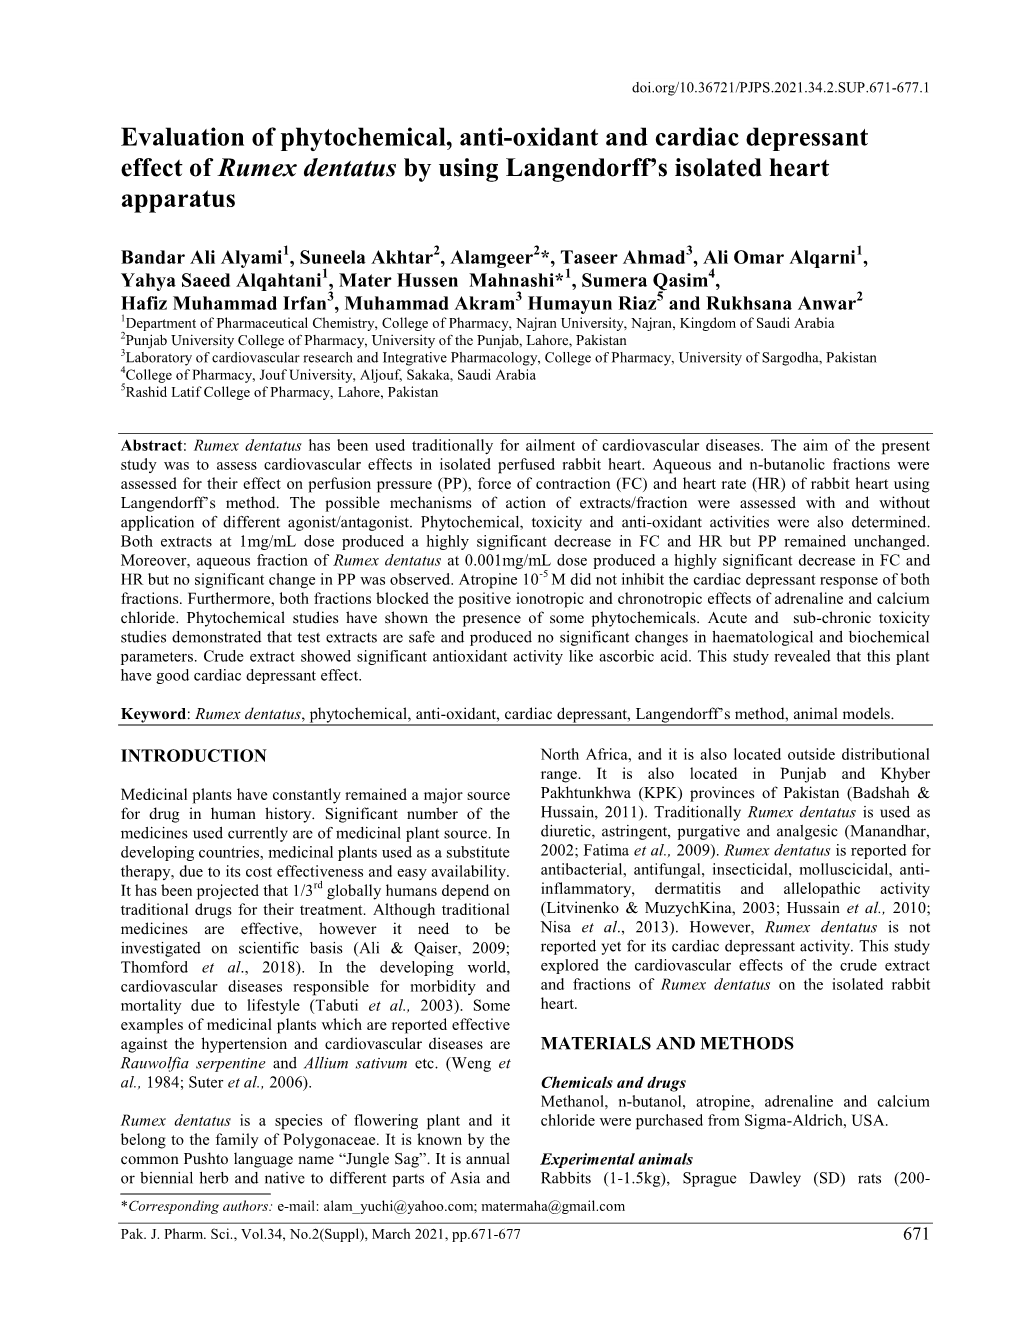 Evaluation of Phytochemical, Anti-Oxidant and Cardiac Depressant Effect of Rumex Dentatus by Using Langendorff’S Isolated Heart Apparatus